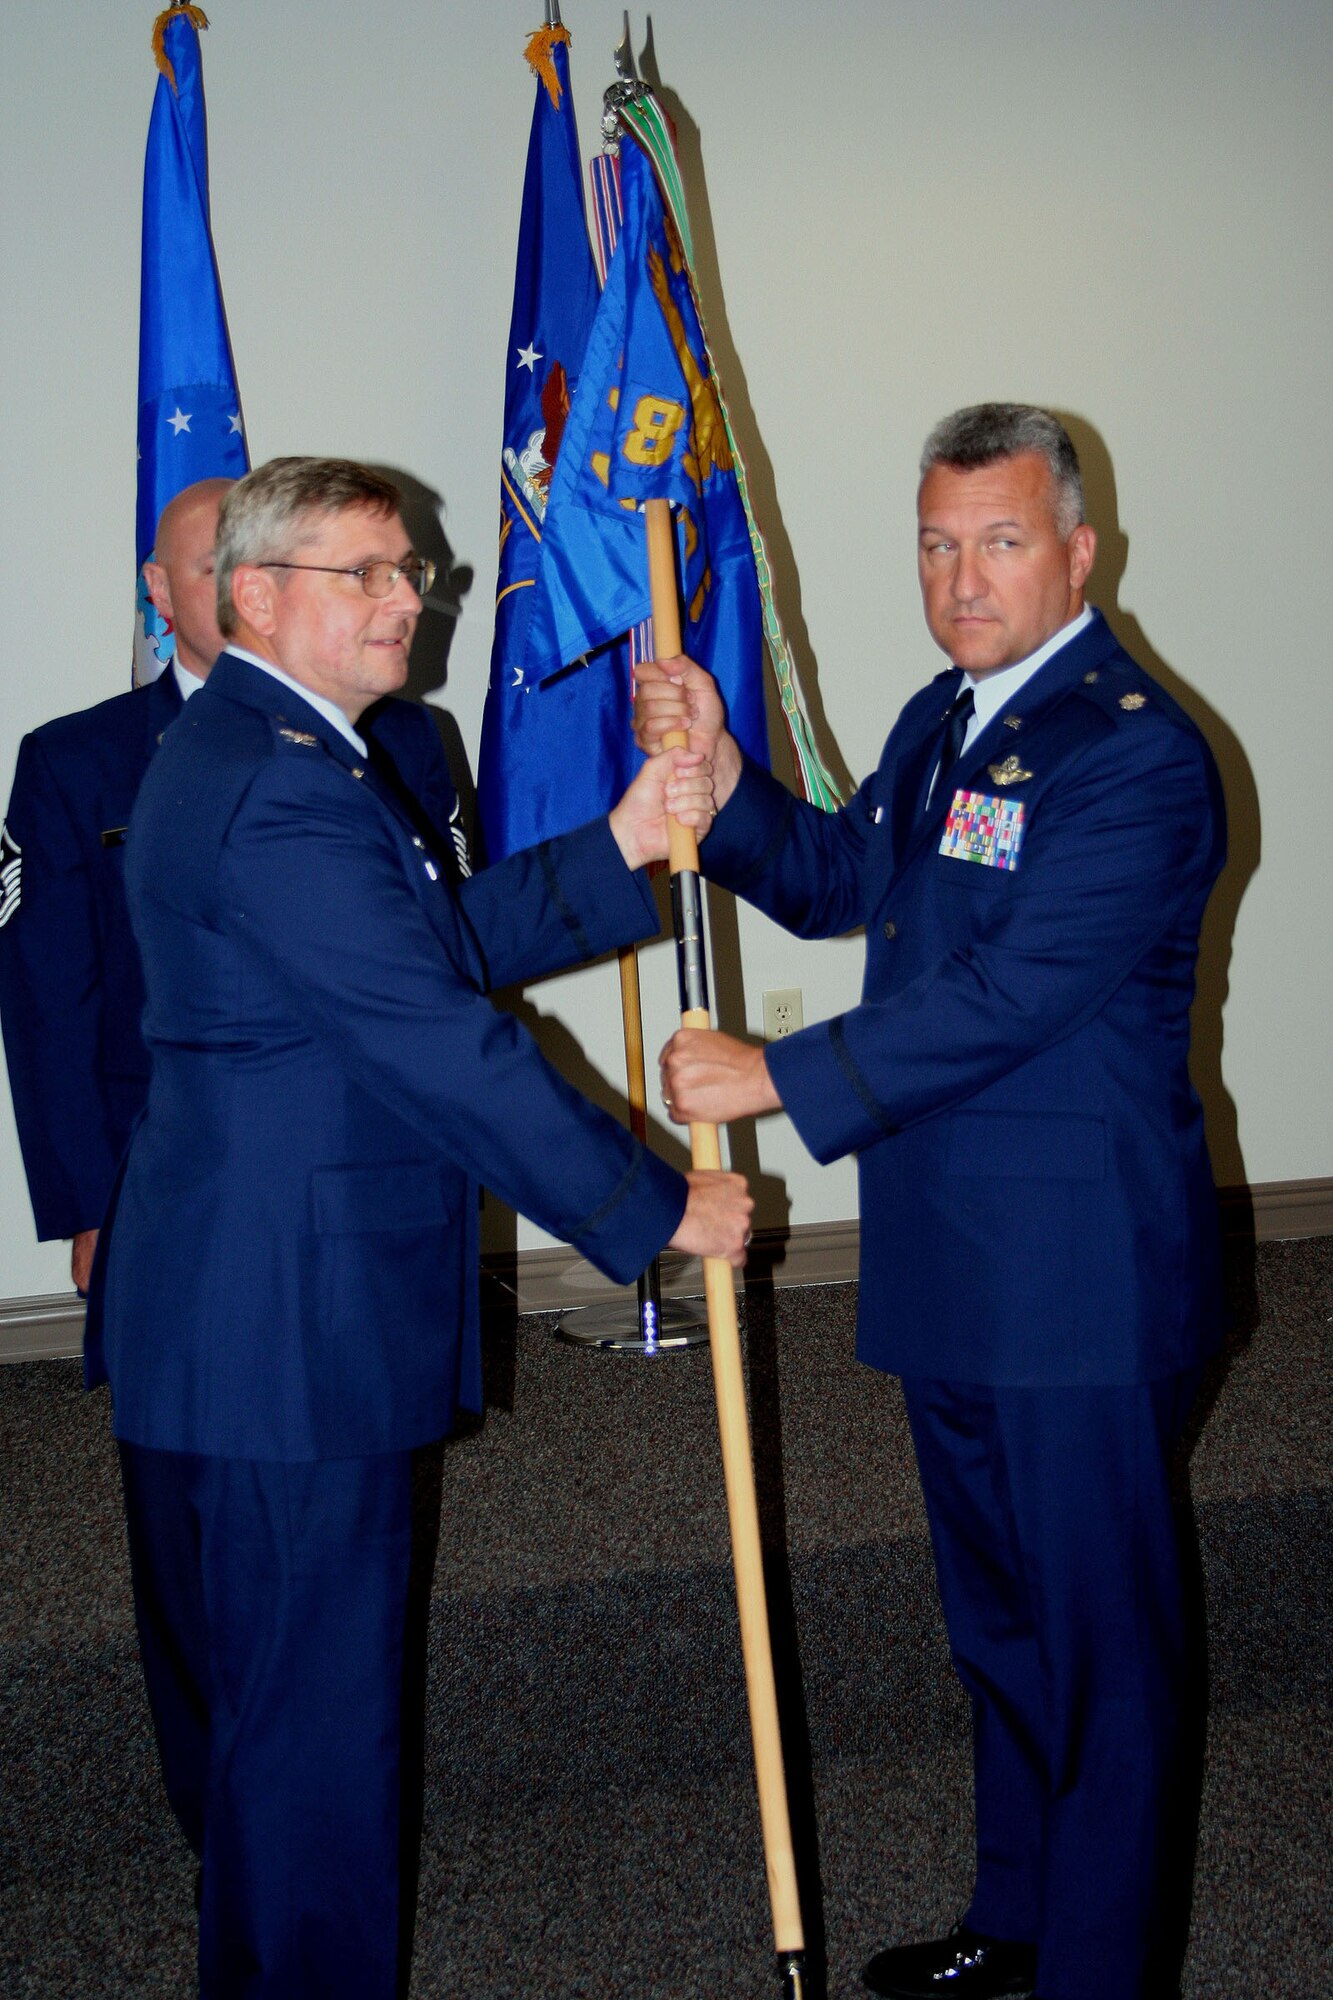 WRIGHT-PATTERSON AFB, Ohio - Col. Roger Gallet (left), 445th Operations Group commander, passes the guidon to incoming 89th Airlift Squadron Commander Lt. Col. Mike Bending during the change of command ceremony June 7, 2008.  The 89th Airlift Squadron is a flying squadron within the 445th Airlift Wing.  (U.S. Air Force photo/Staff Sgt. Martin Moleski)